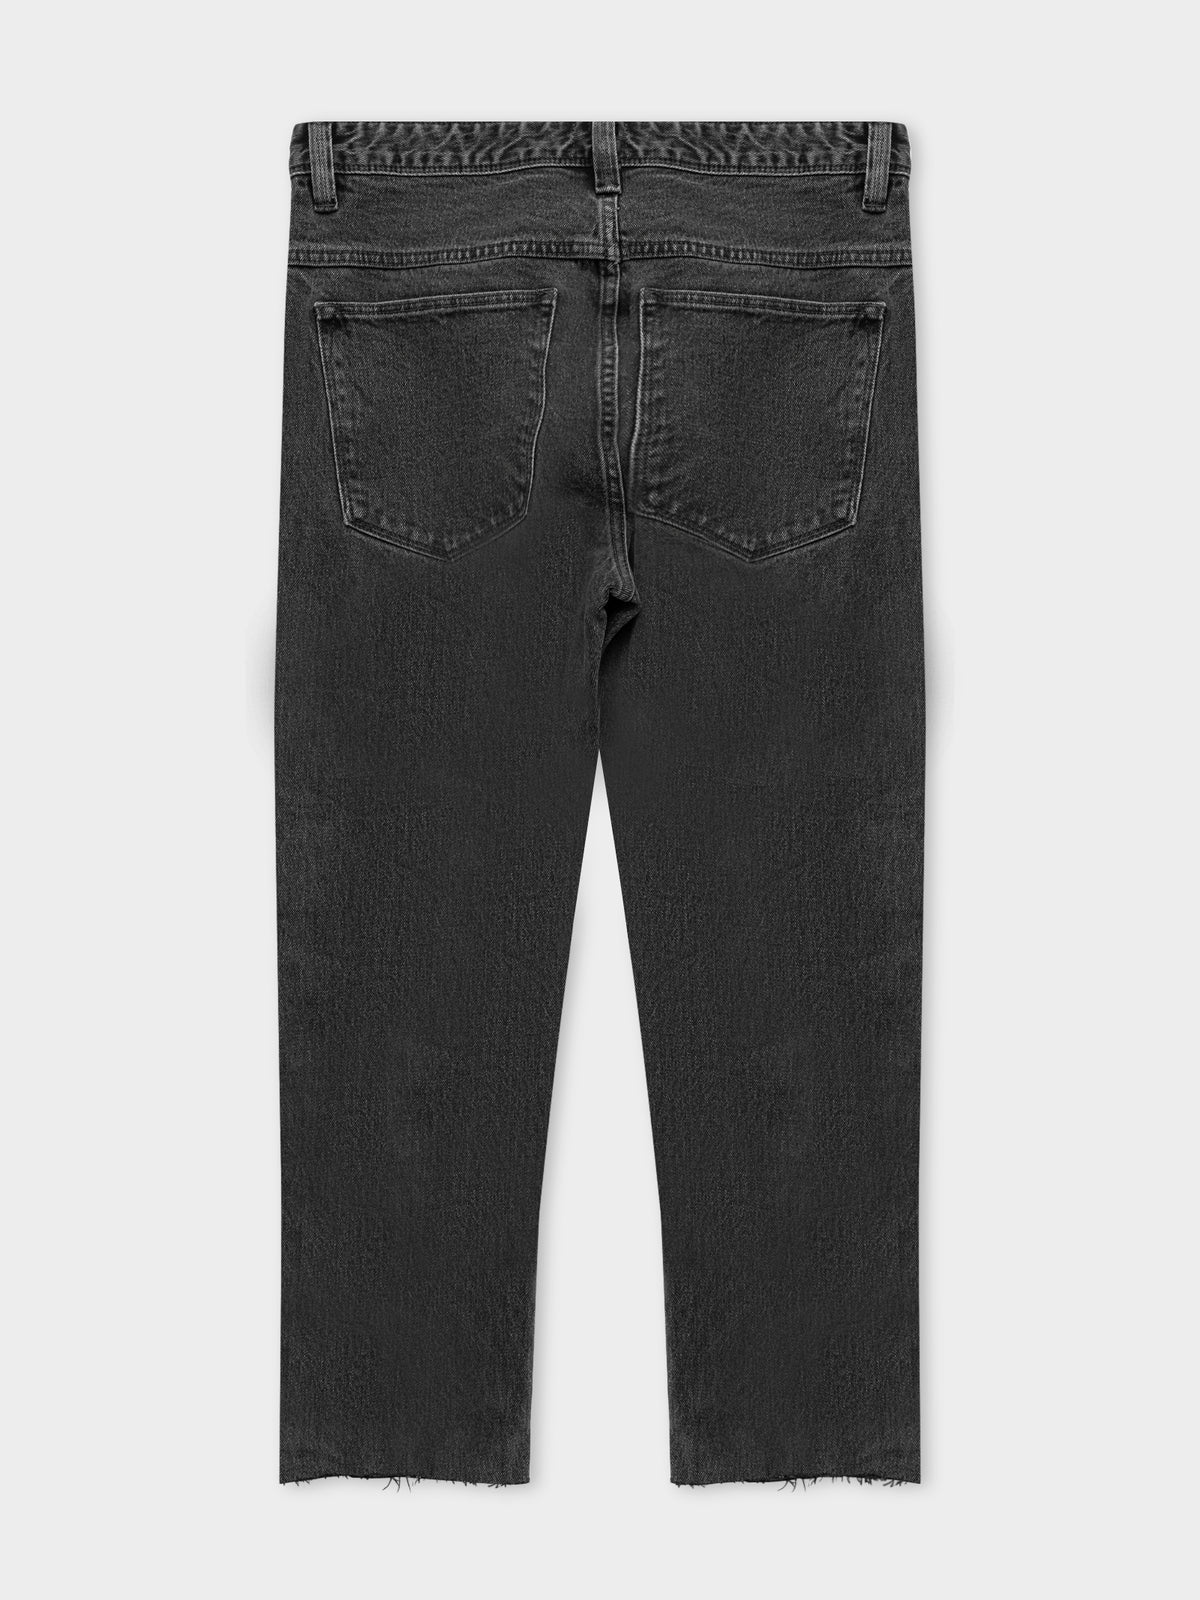 A Cropped Straight Jeans in Bandit Black